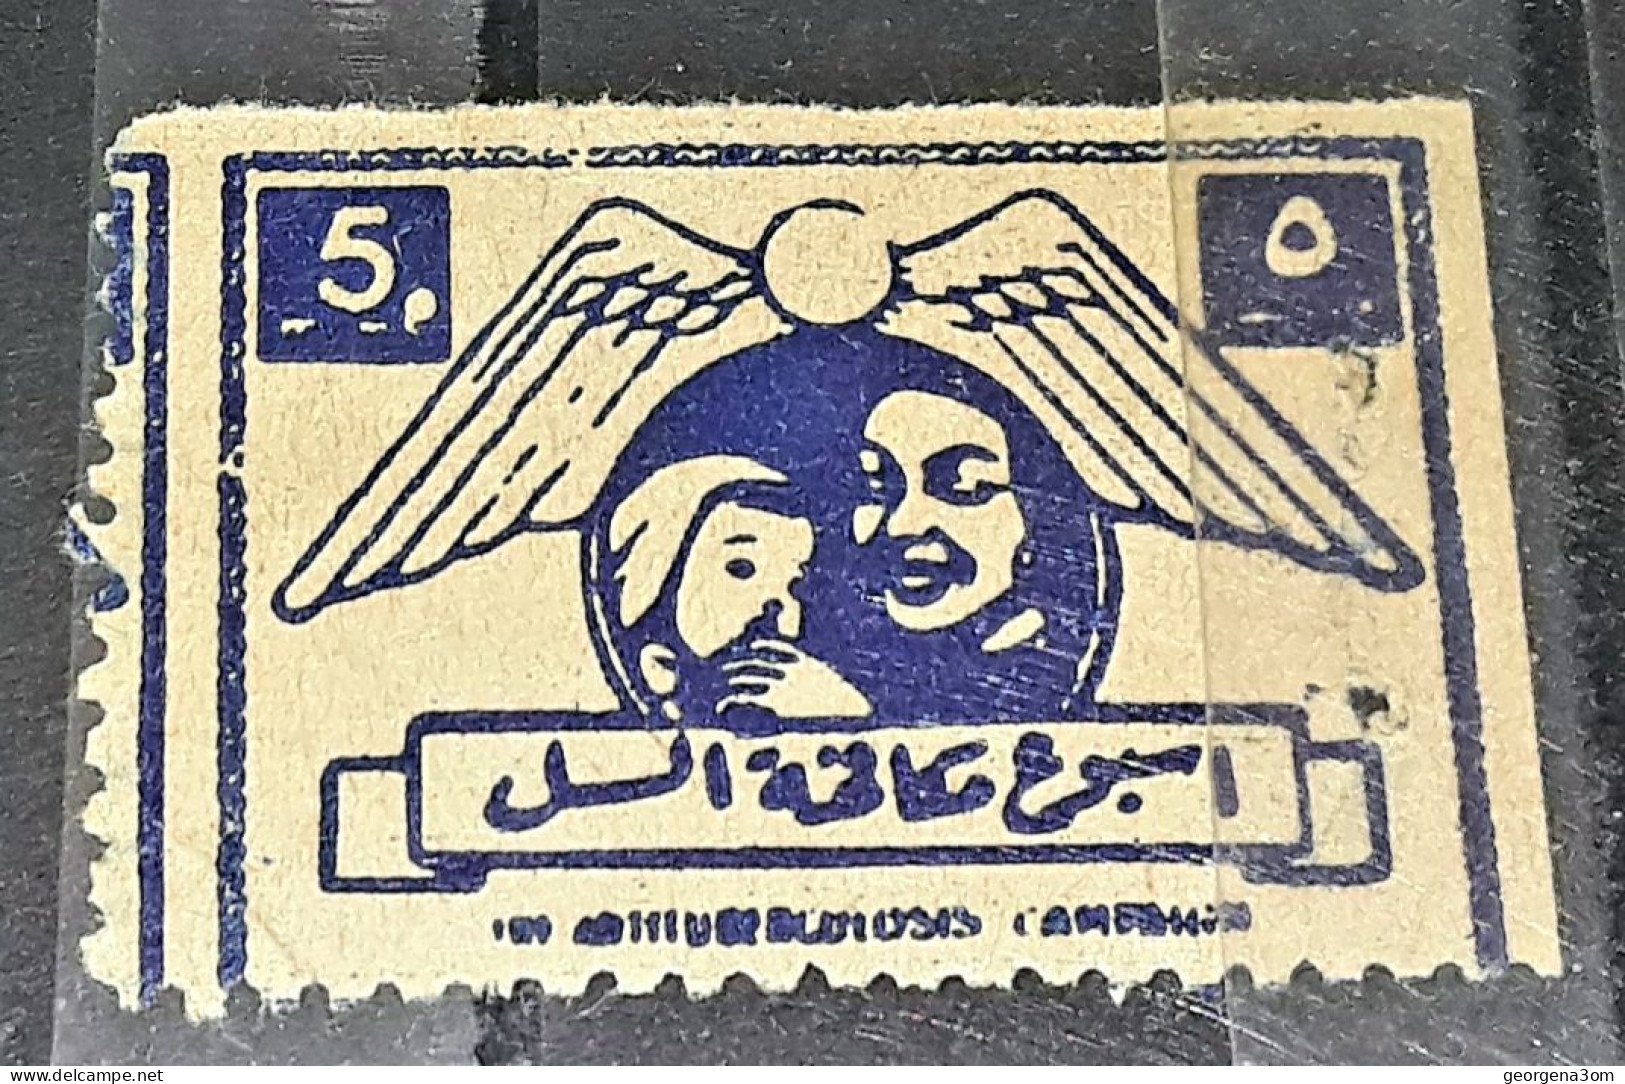 EGYPT VERY RARE OLD LABEL AGAINST TUBERCULOSIS ... VERY HARD TO FIND THIS LABEL - Hotel Labels